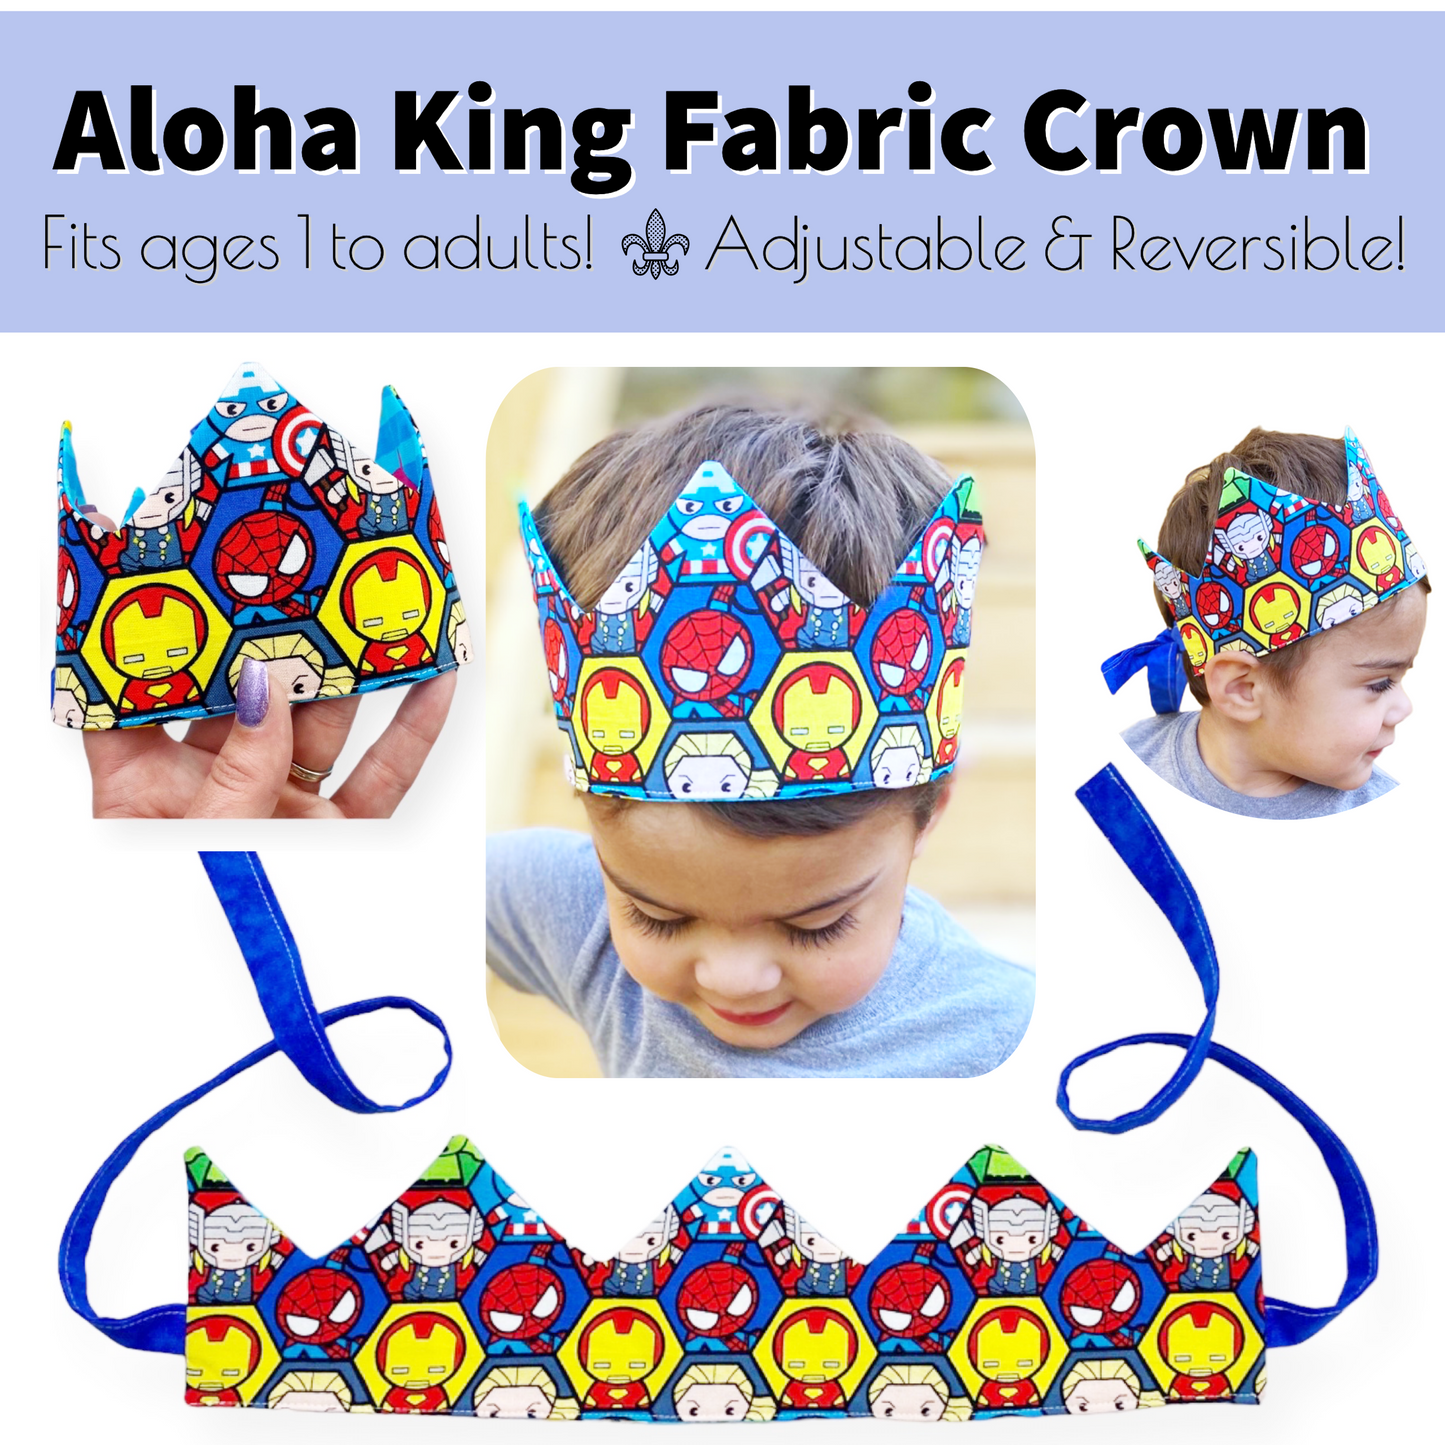 Fabric crown sewing pattern for boys or girls, diy birthday crown, how to sew a king crown